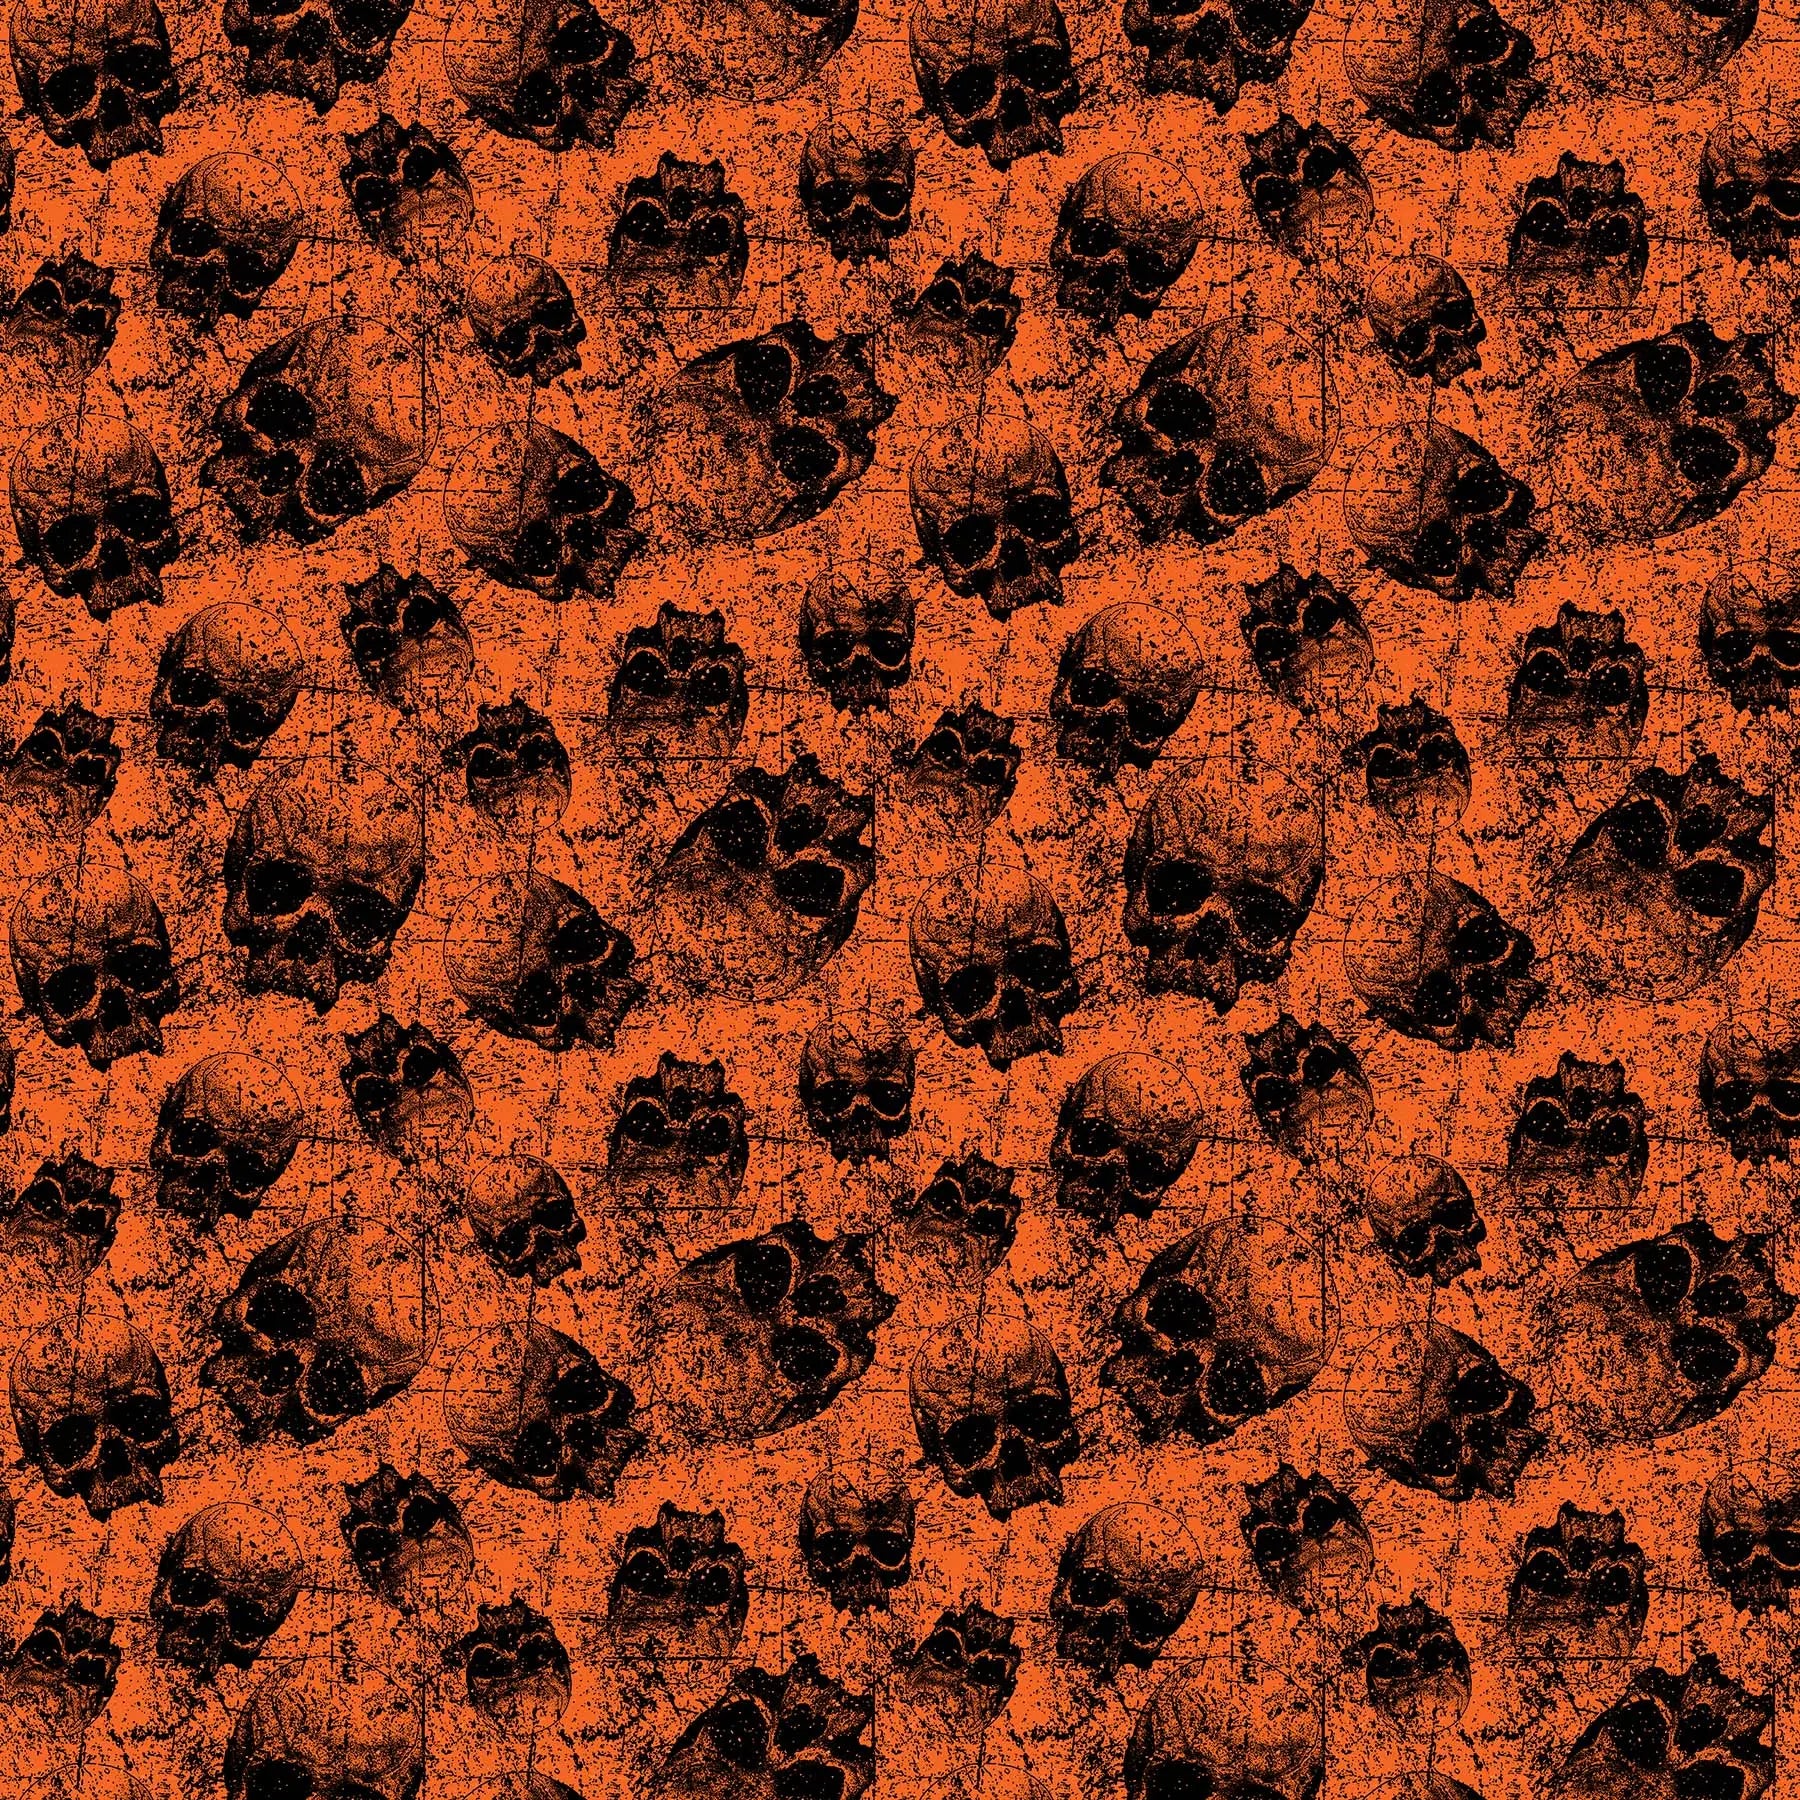 Orange Scattered Skulls Cotton Fabric per yard - Linda's Electric Quilters